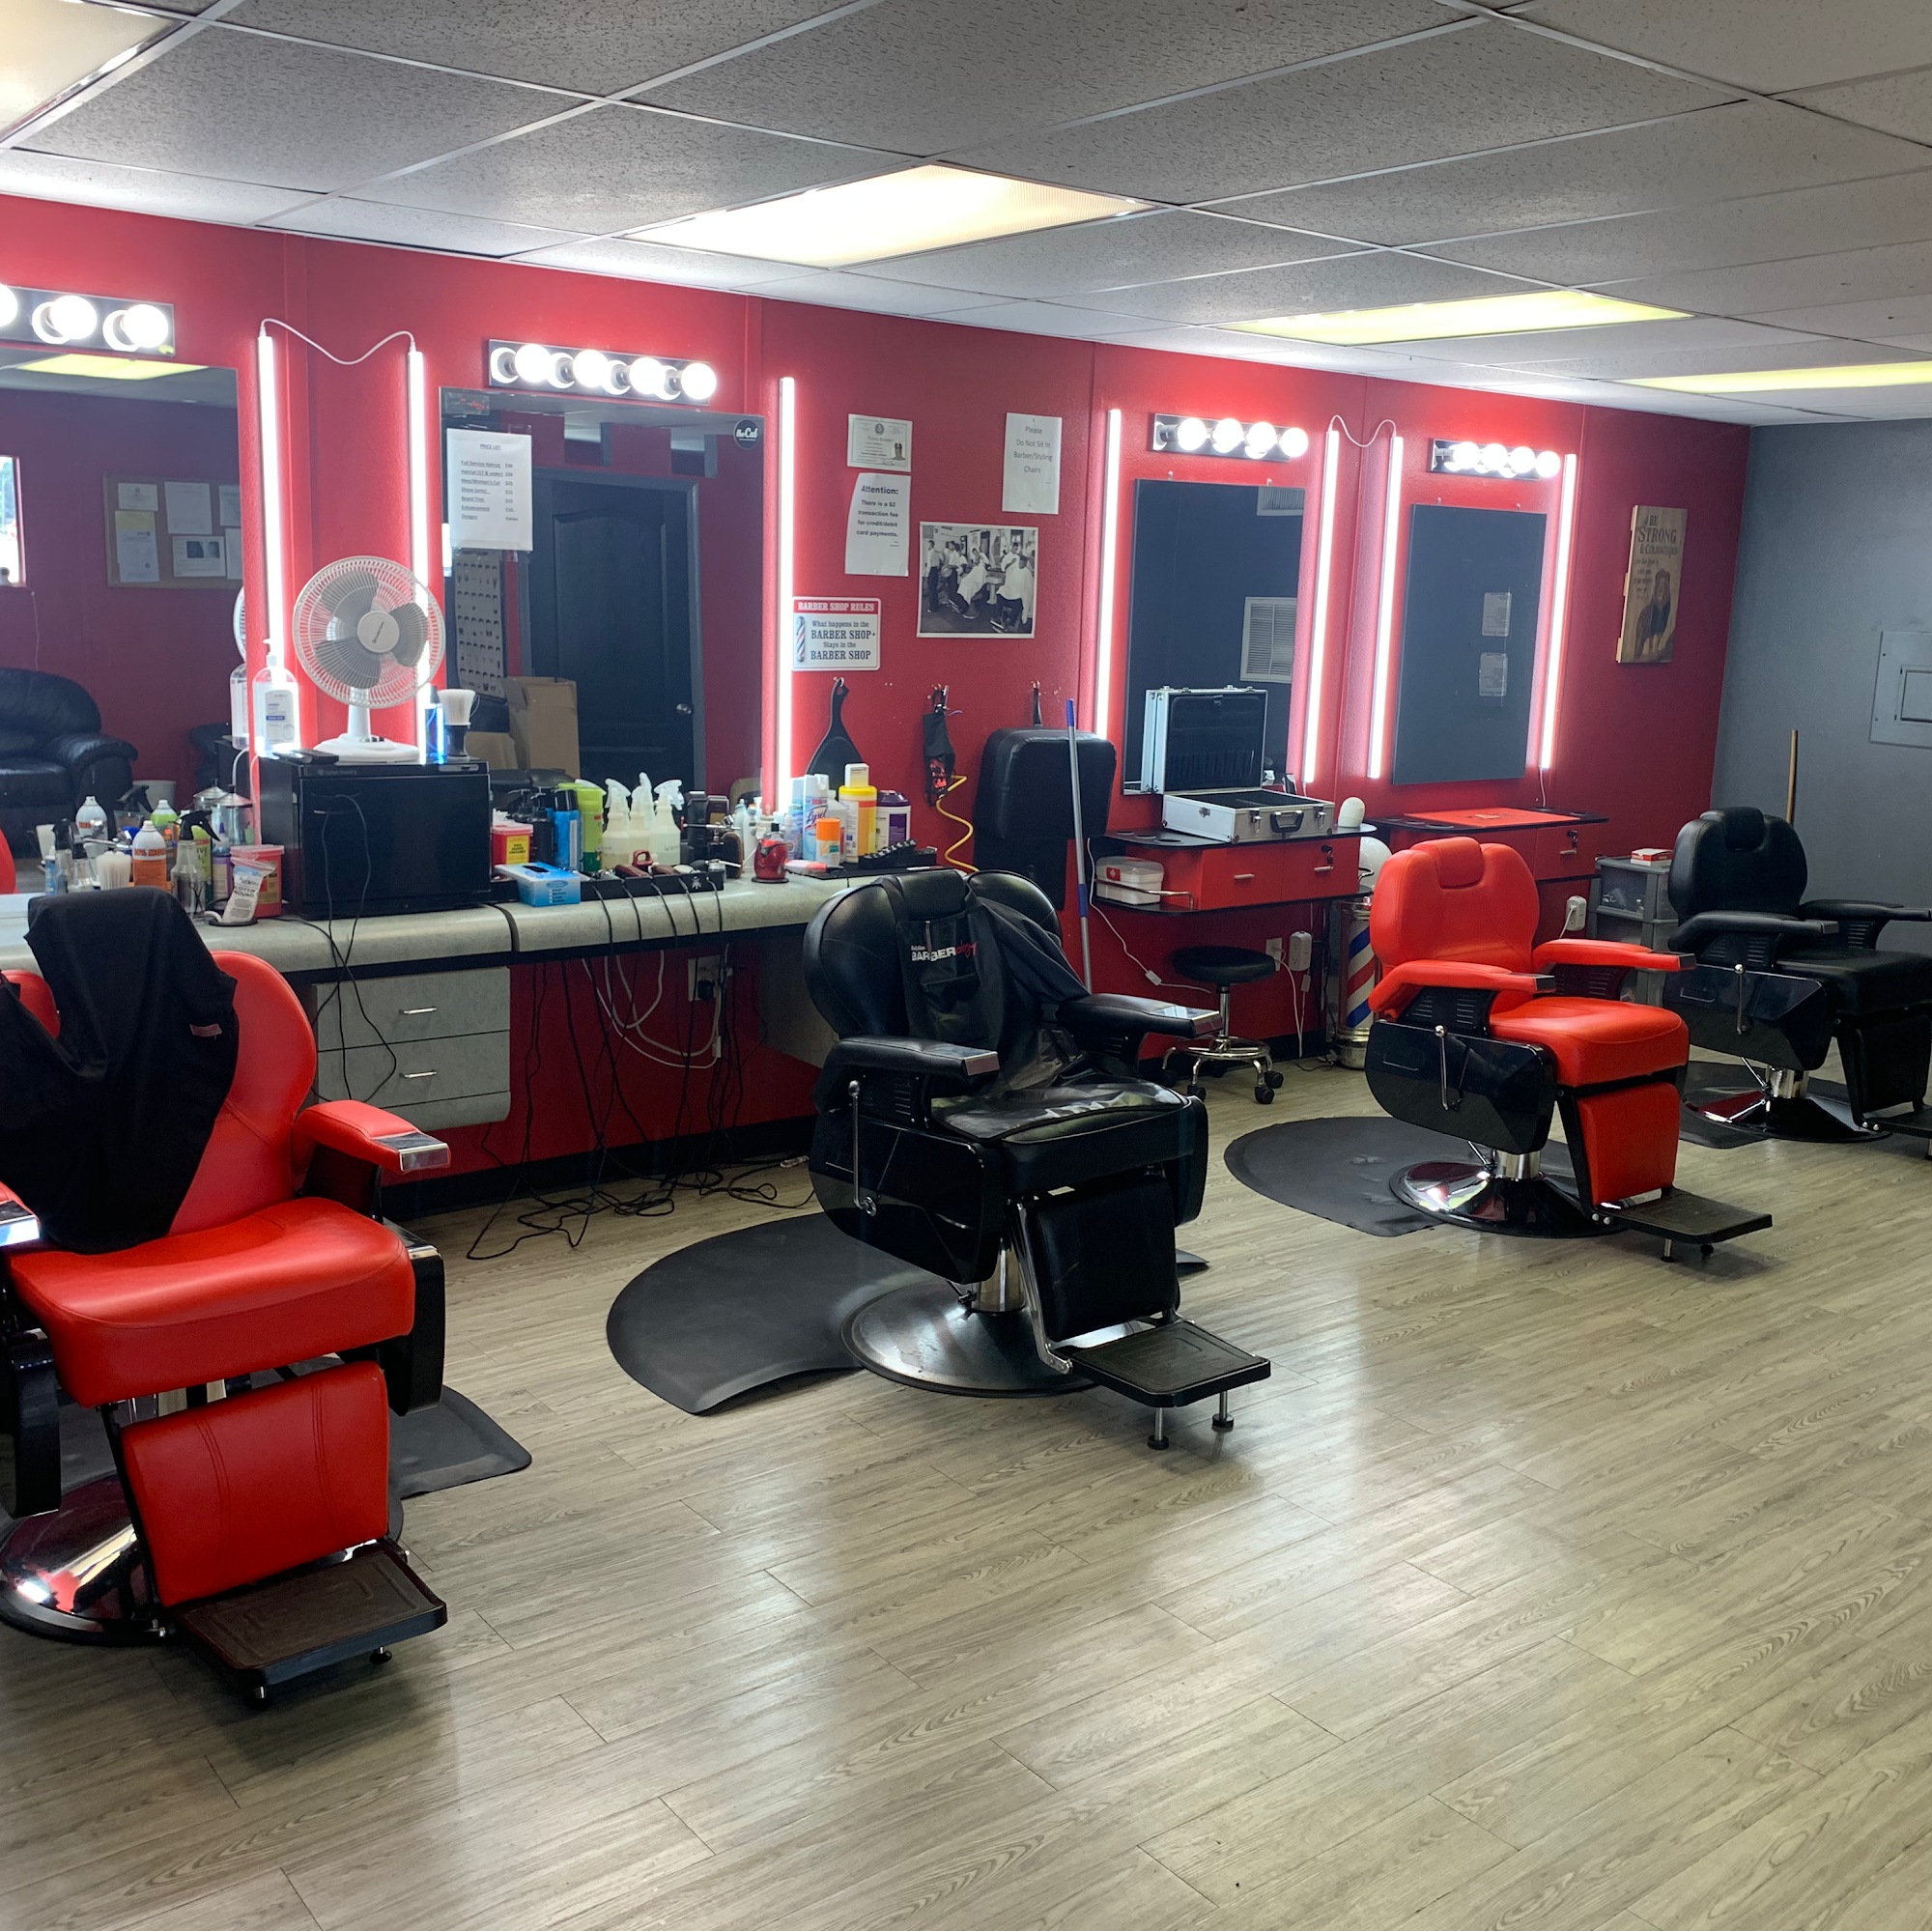 The Cutting Edge Barber and Beauty Salon